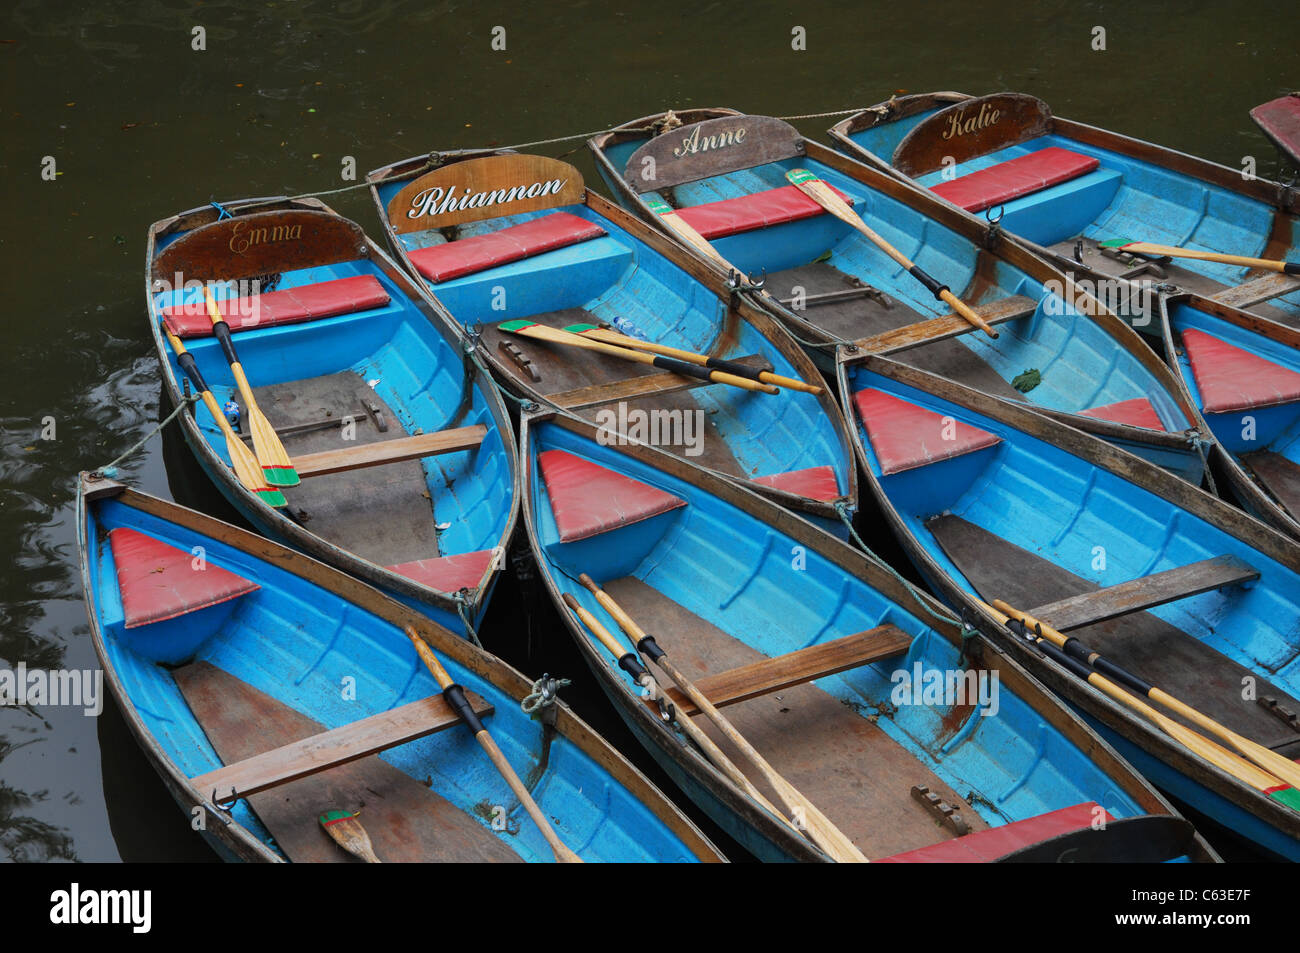 rowing boats for hire Oxford England Stock Photo